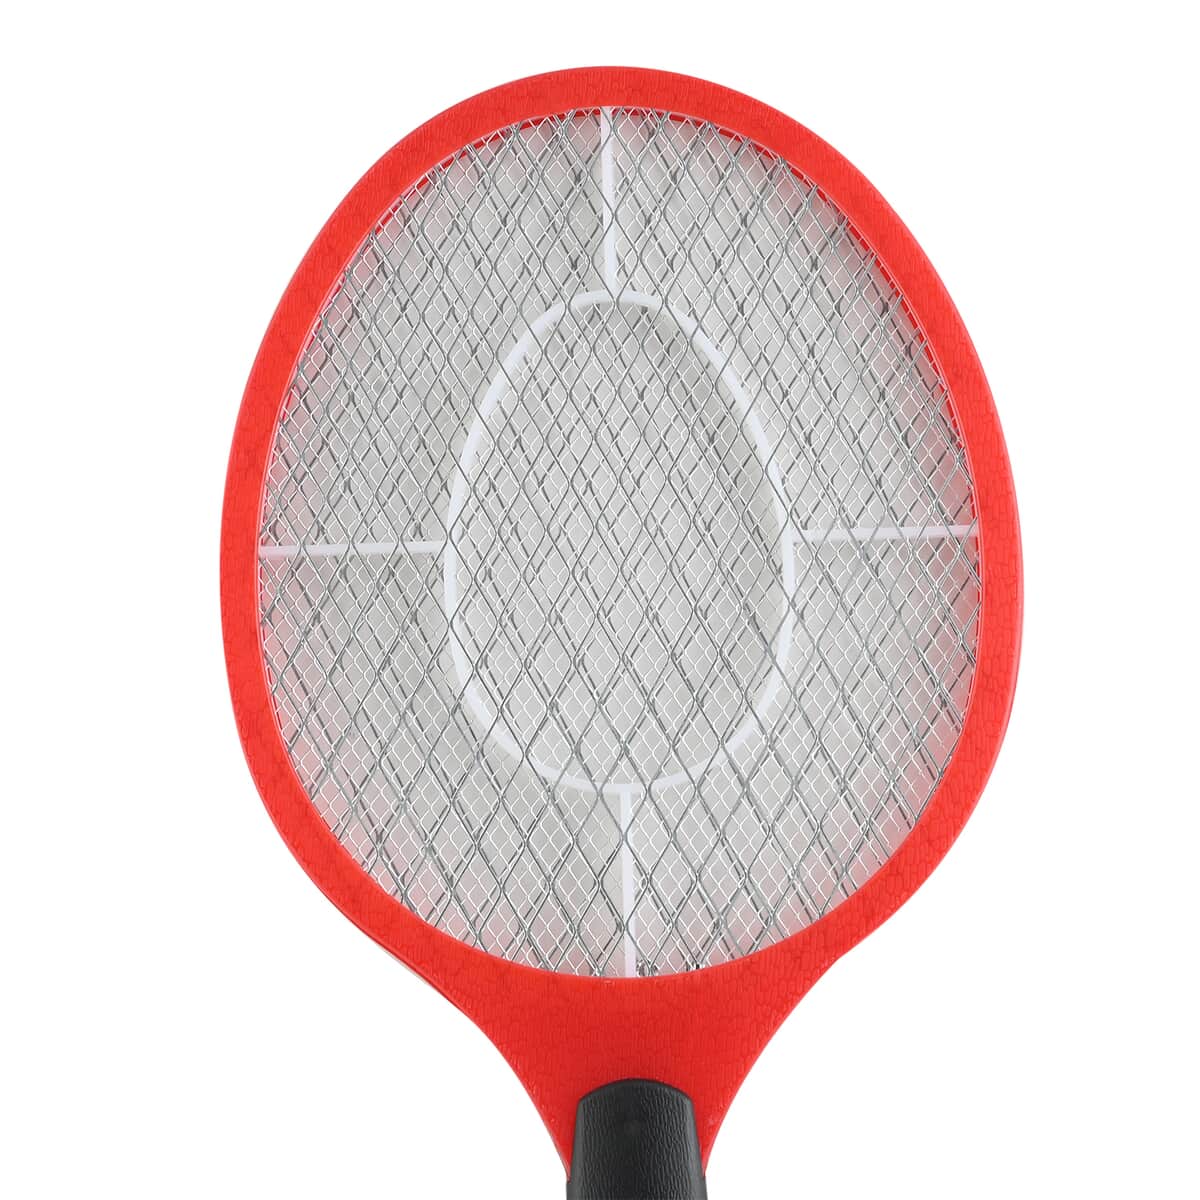 Handheld Battery Powered Bug Zapper - Red (Requires 2xAA Not Included) image number 4